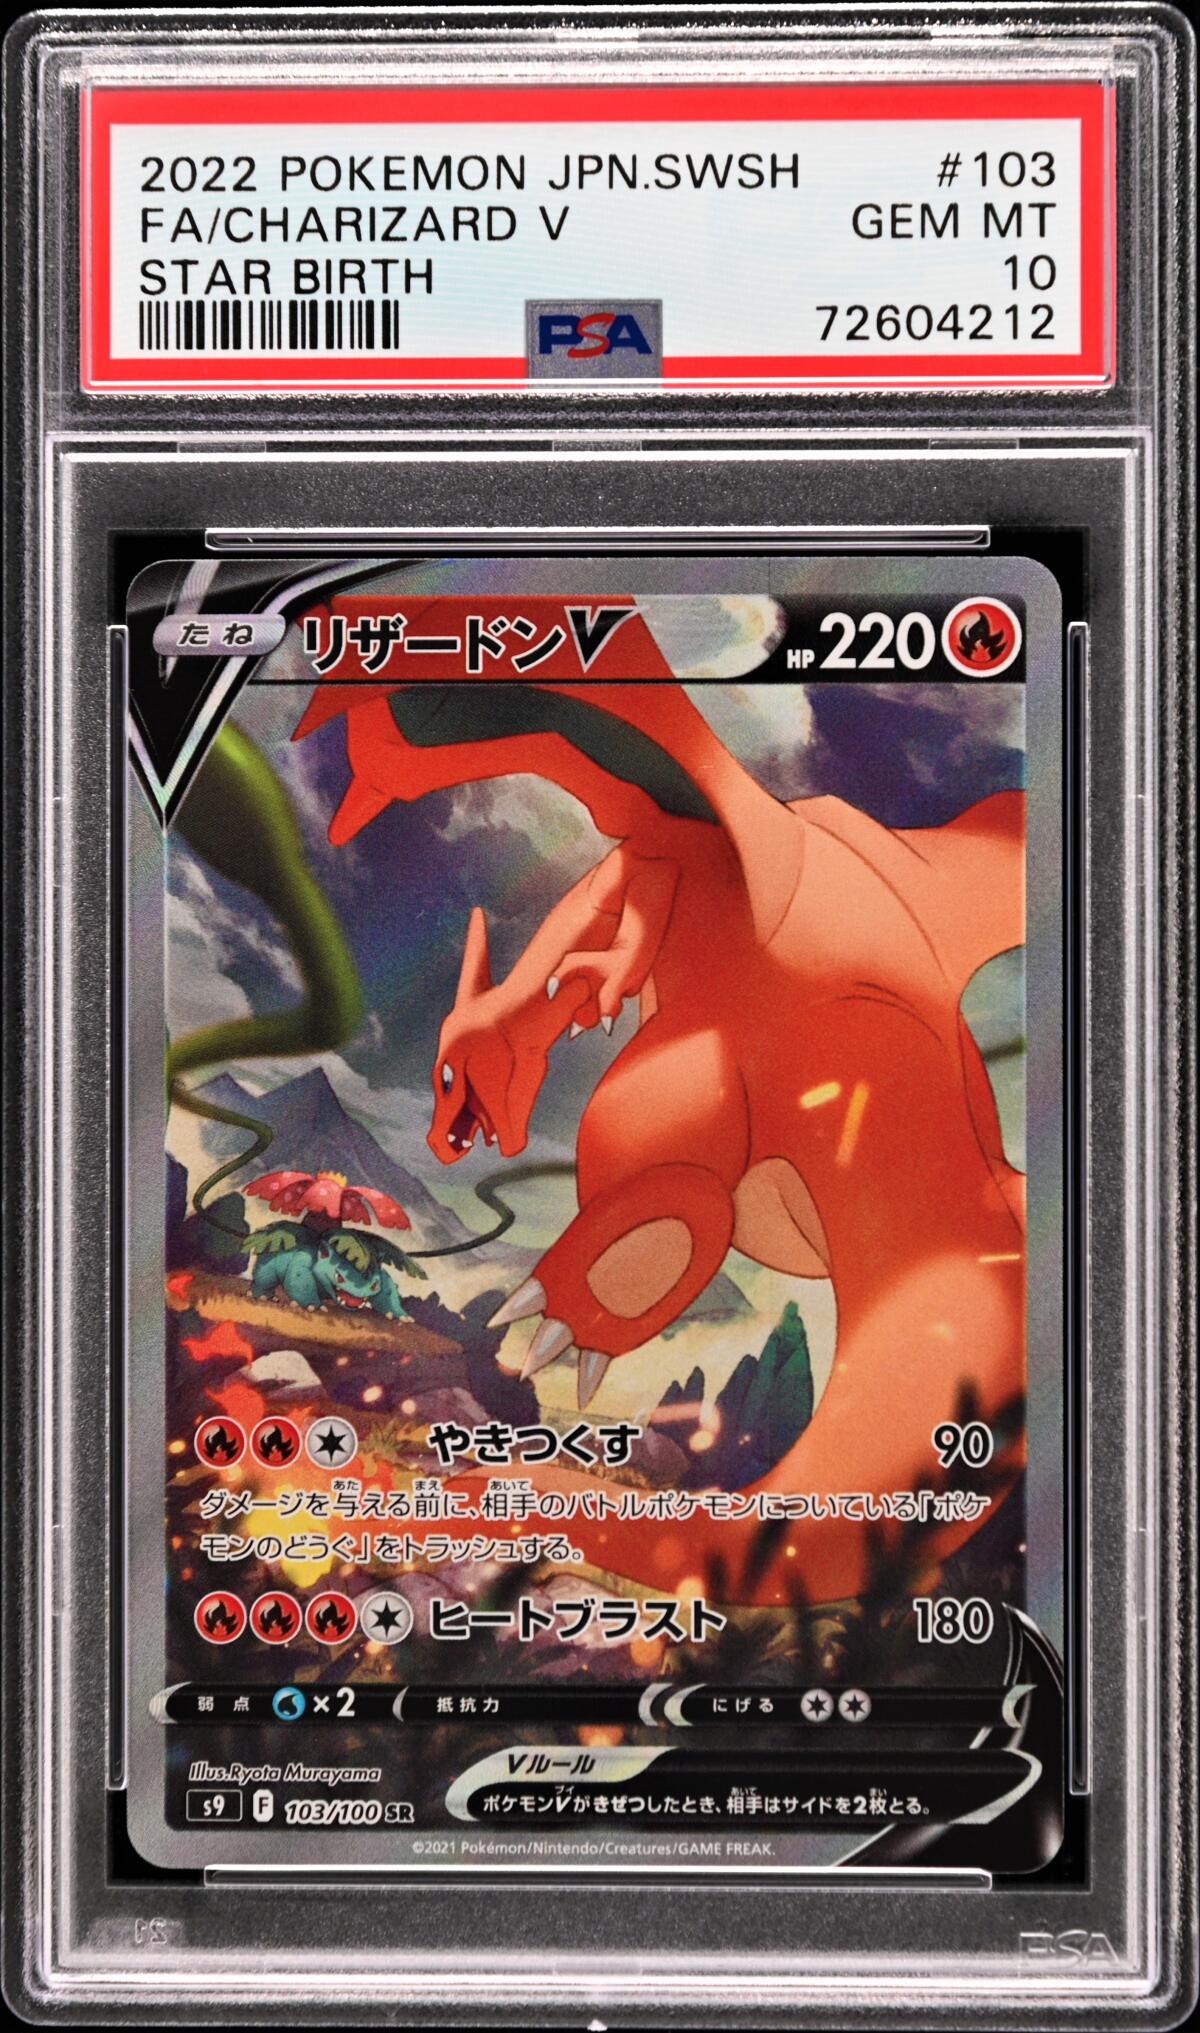 A 2022 card depicting the Pokémon character Charizard is one of the Top 10 most graded cards in the world.